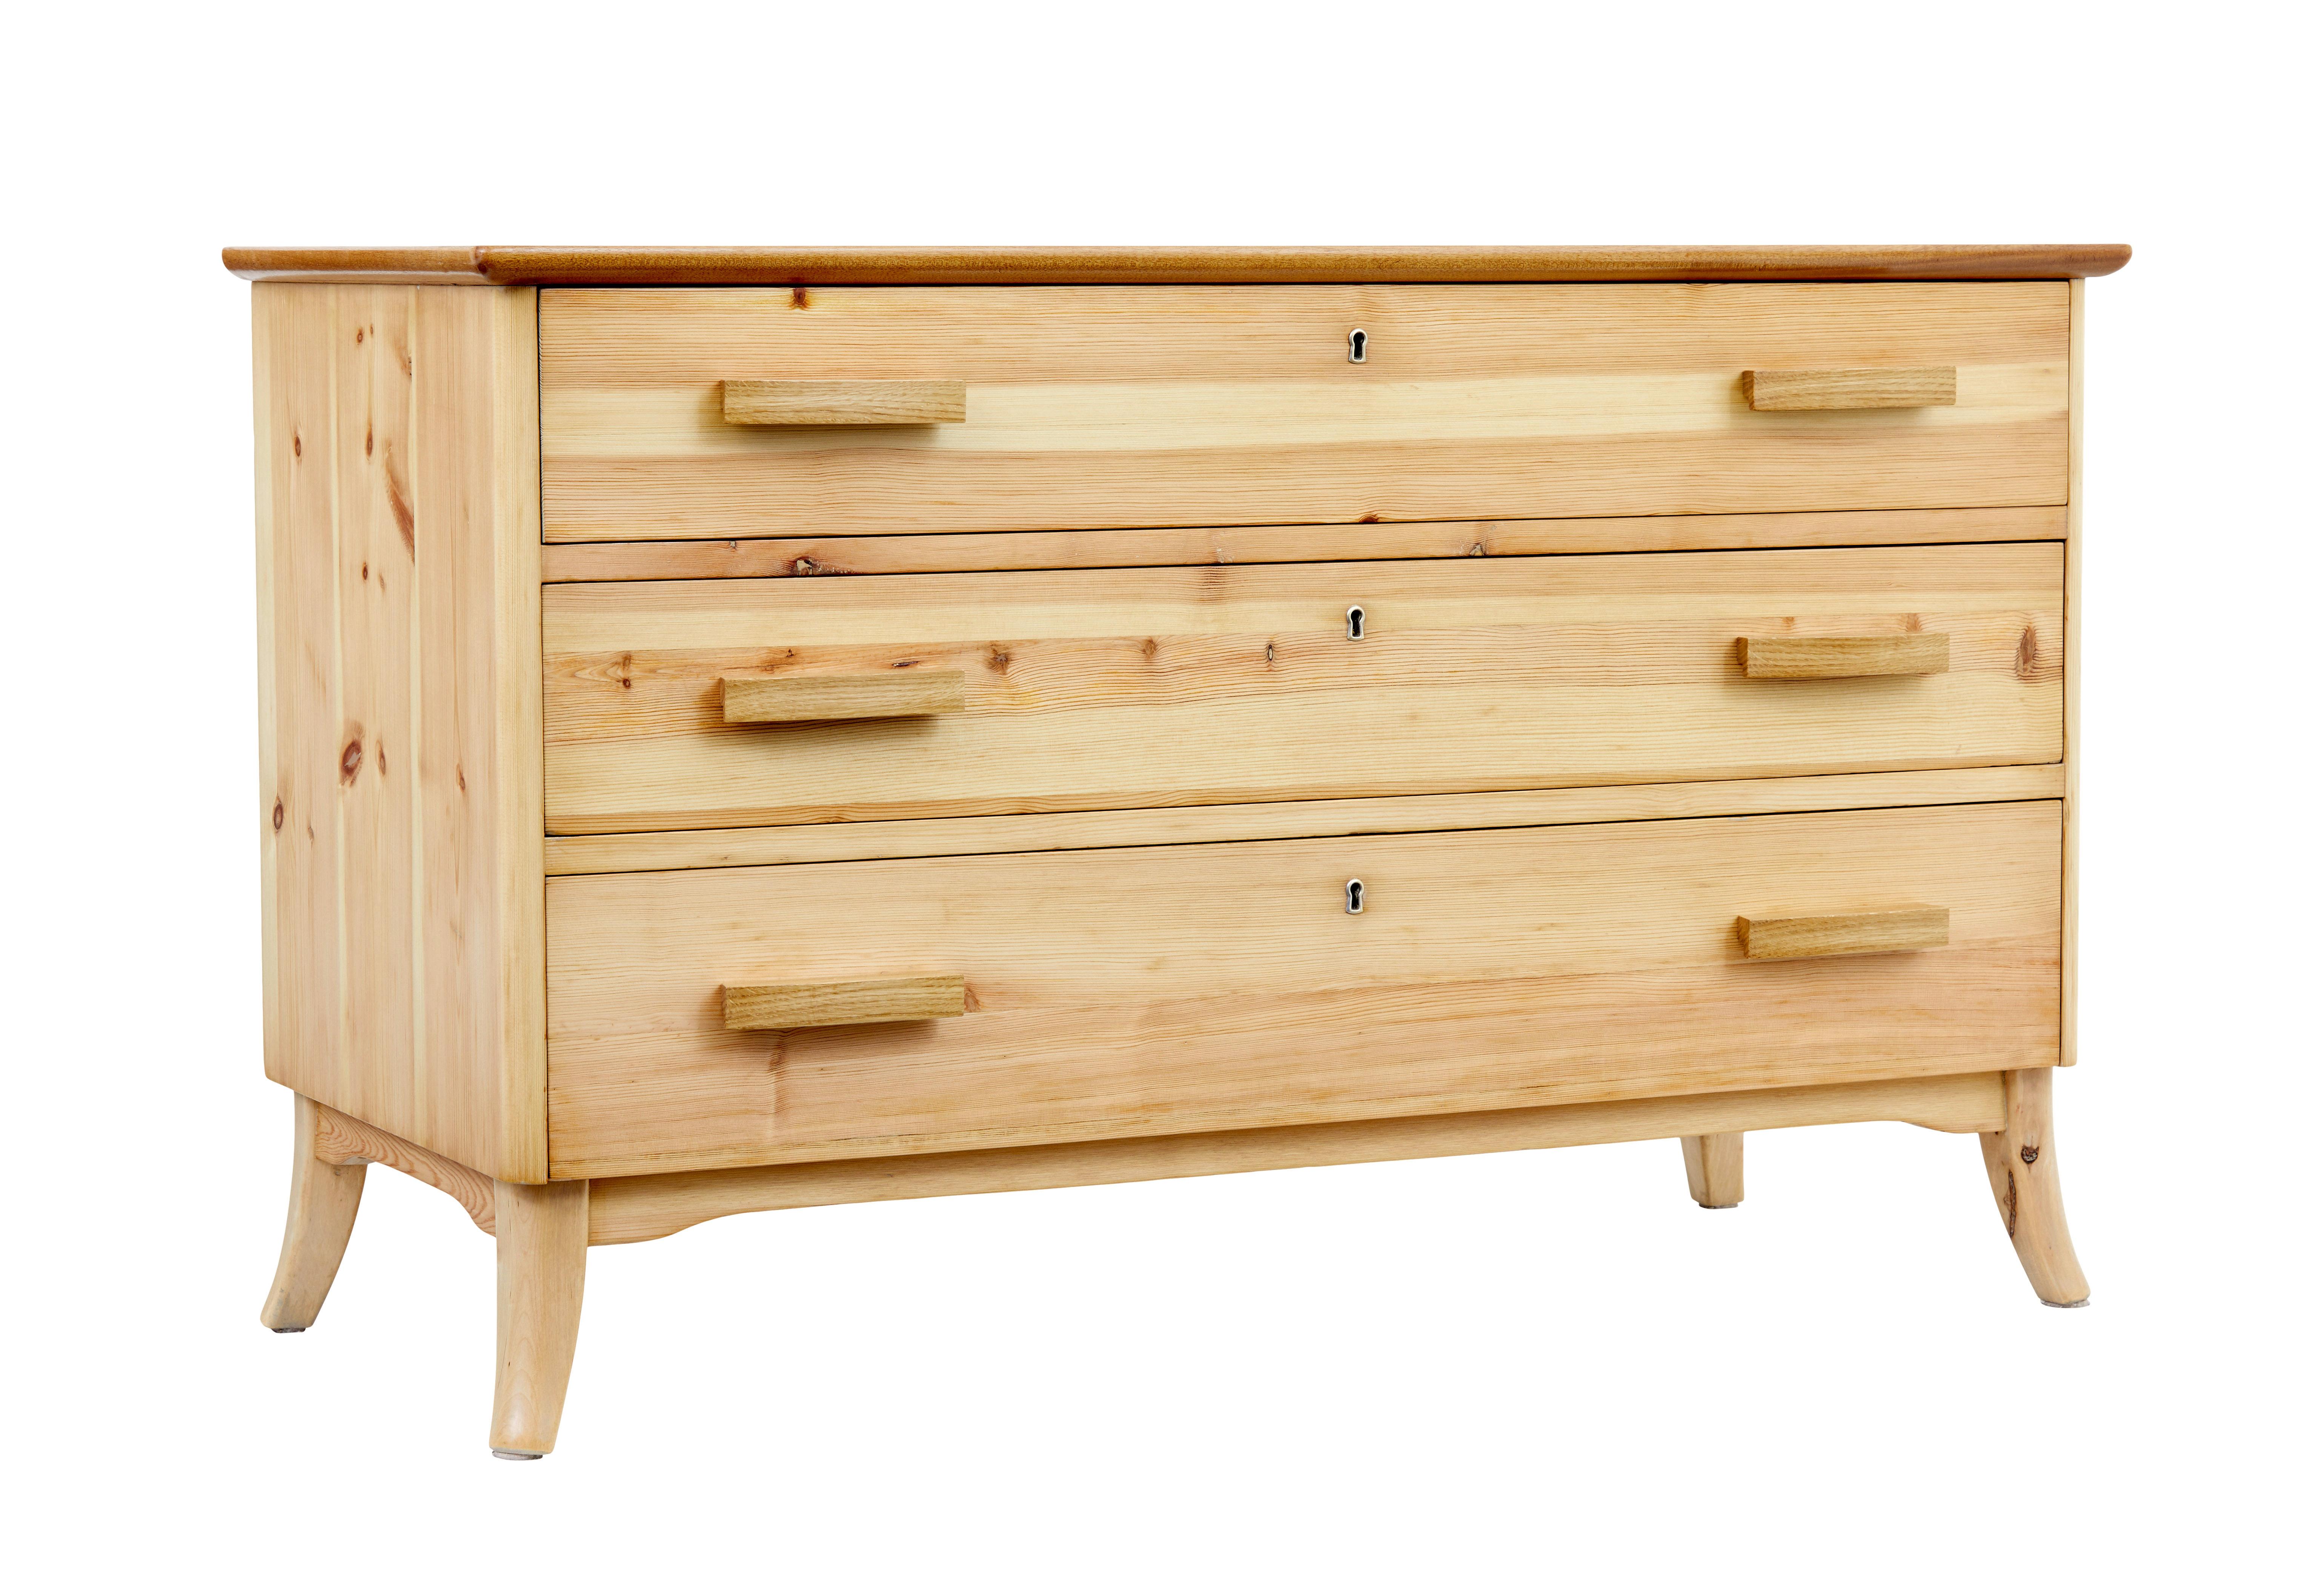 20th Century Mid 20th century Swedish pine chest of drawers For Sale